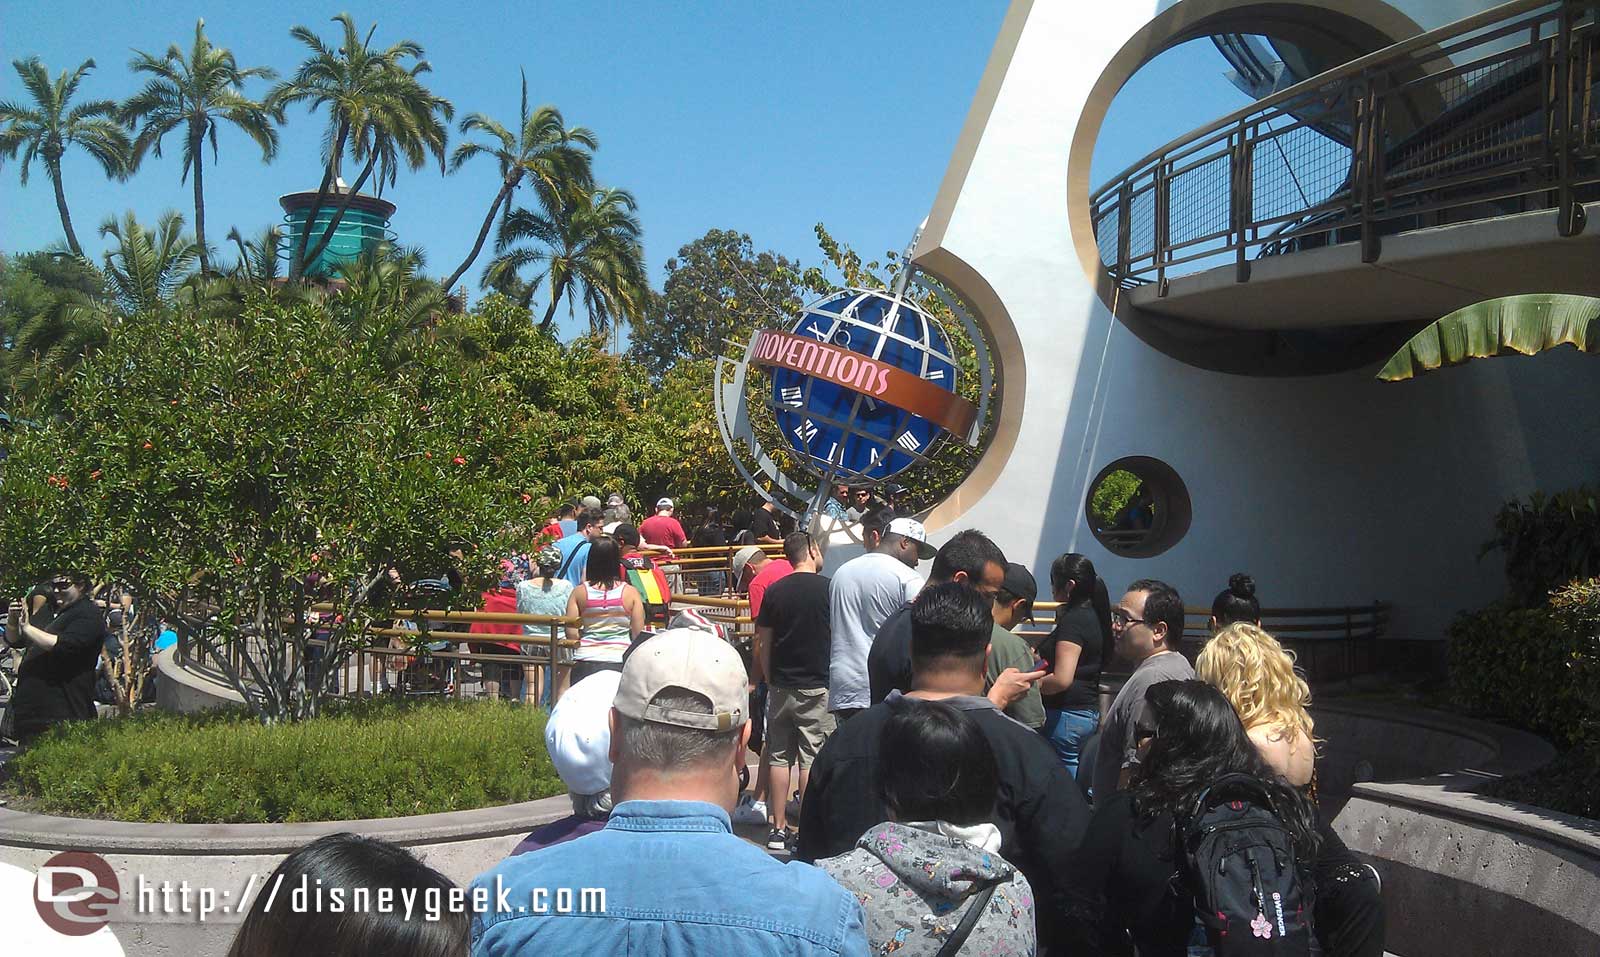 The line for the Iron Man Annual.Passholder wristband distribution stretches out to Tomorrowland